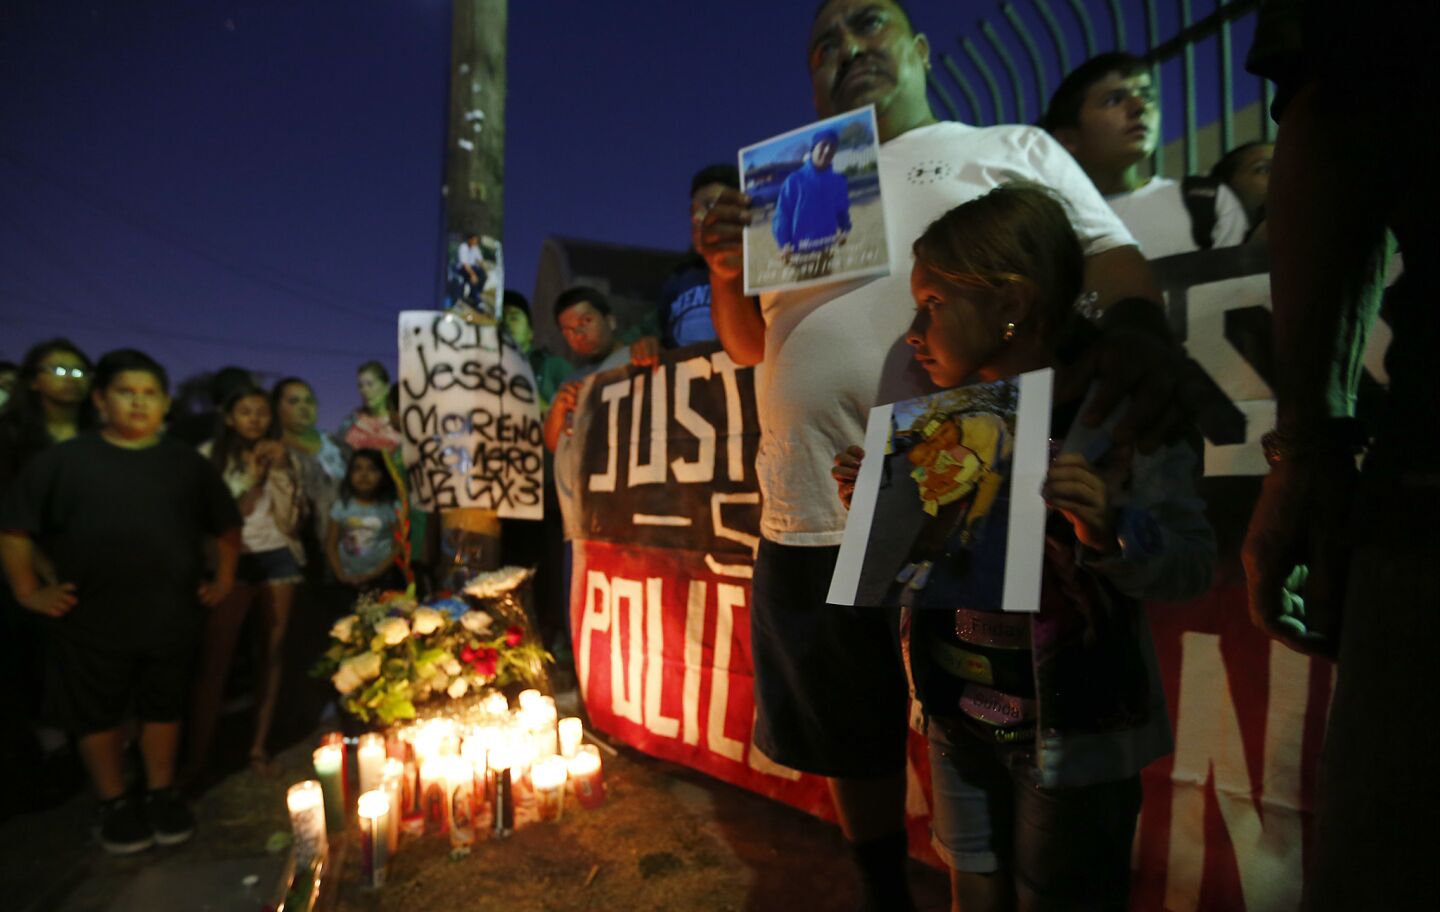 Boyle Heights residents gather near the intersection of Breed Street and Cesar Chavez Avenue on Wednesday night to protest the fatal officer-involved shooting of Jesse Moreno Romero.